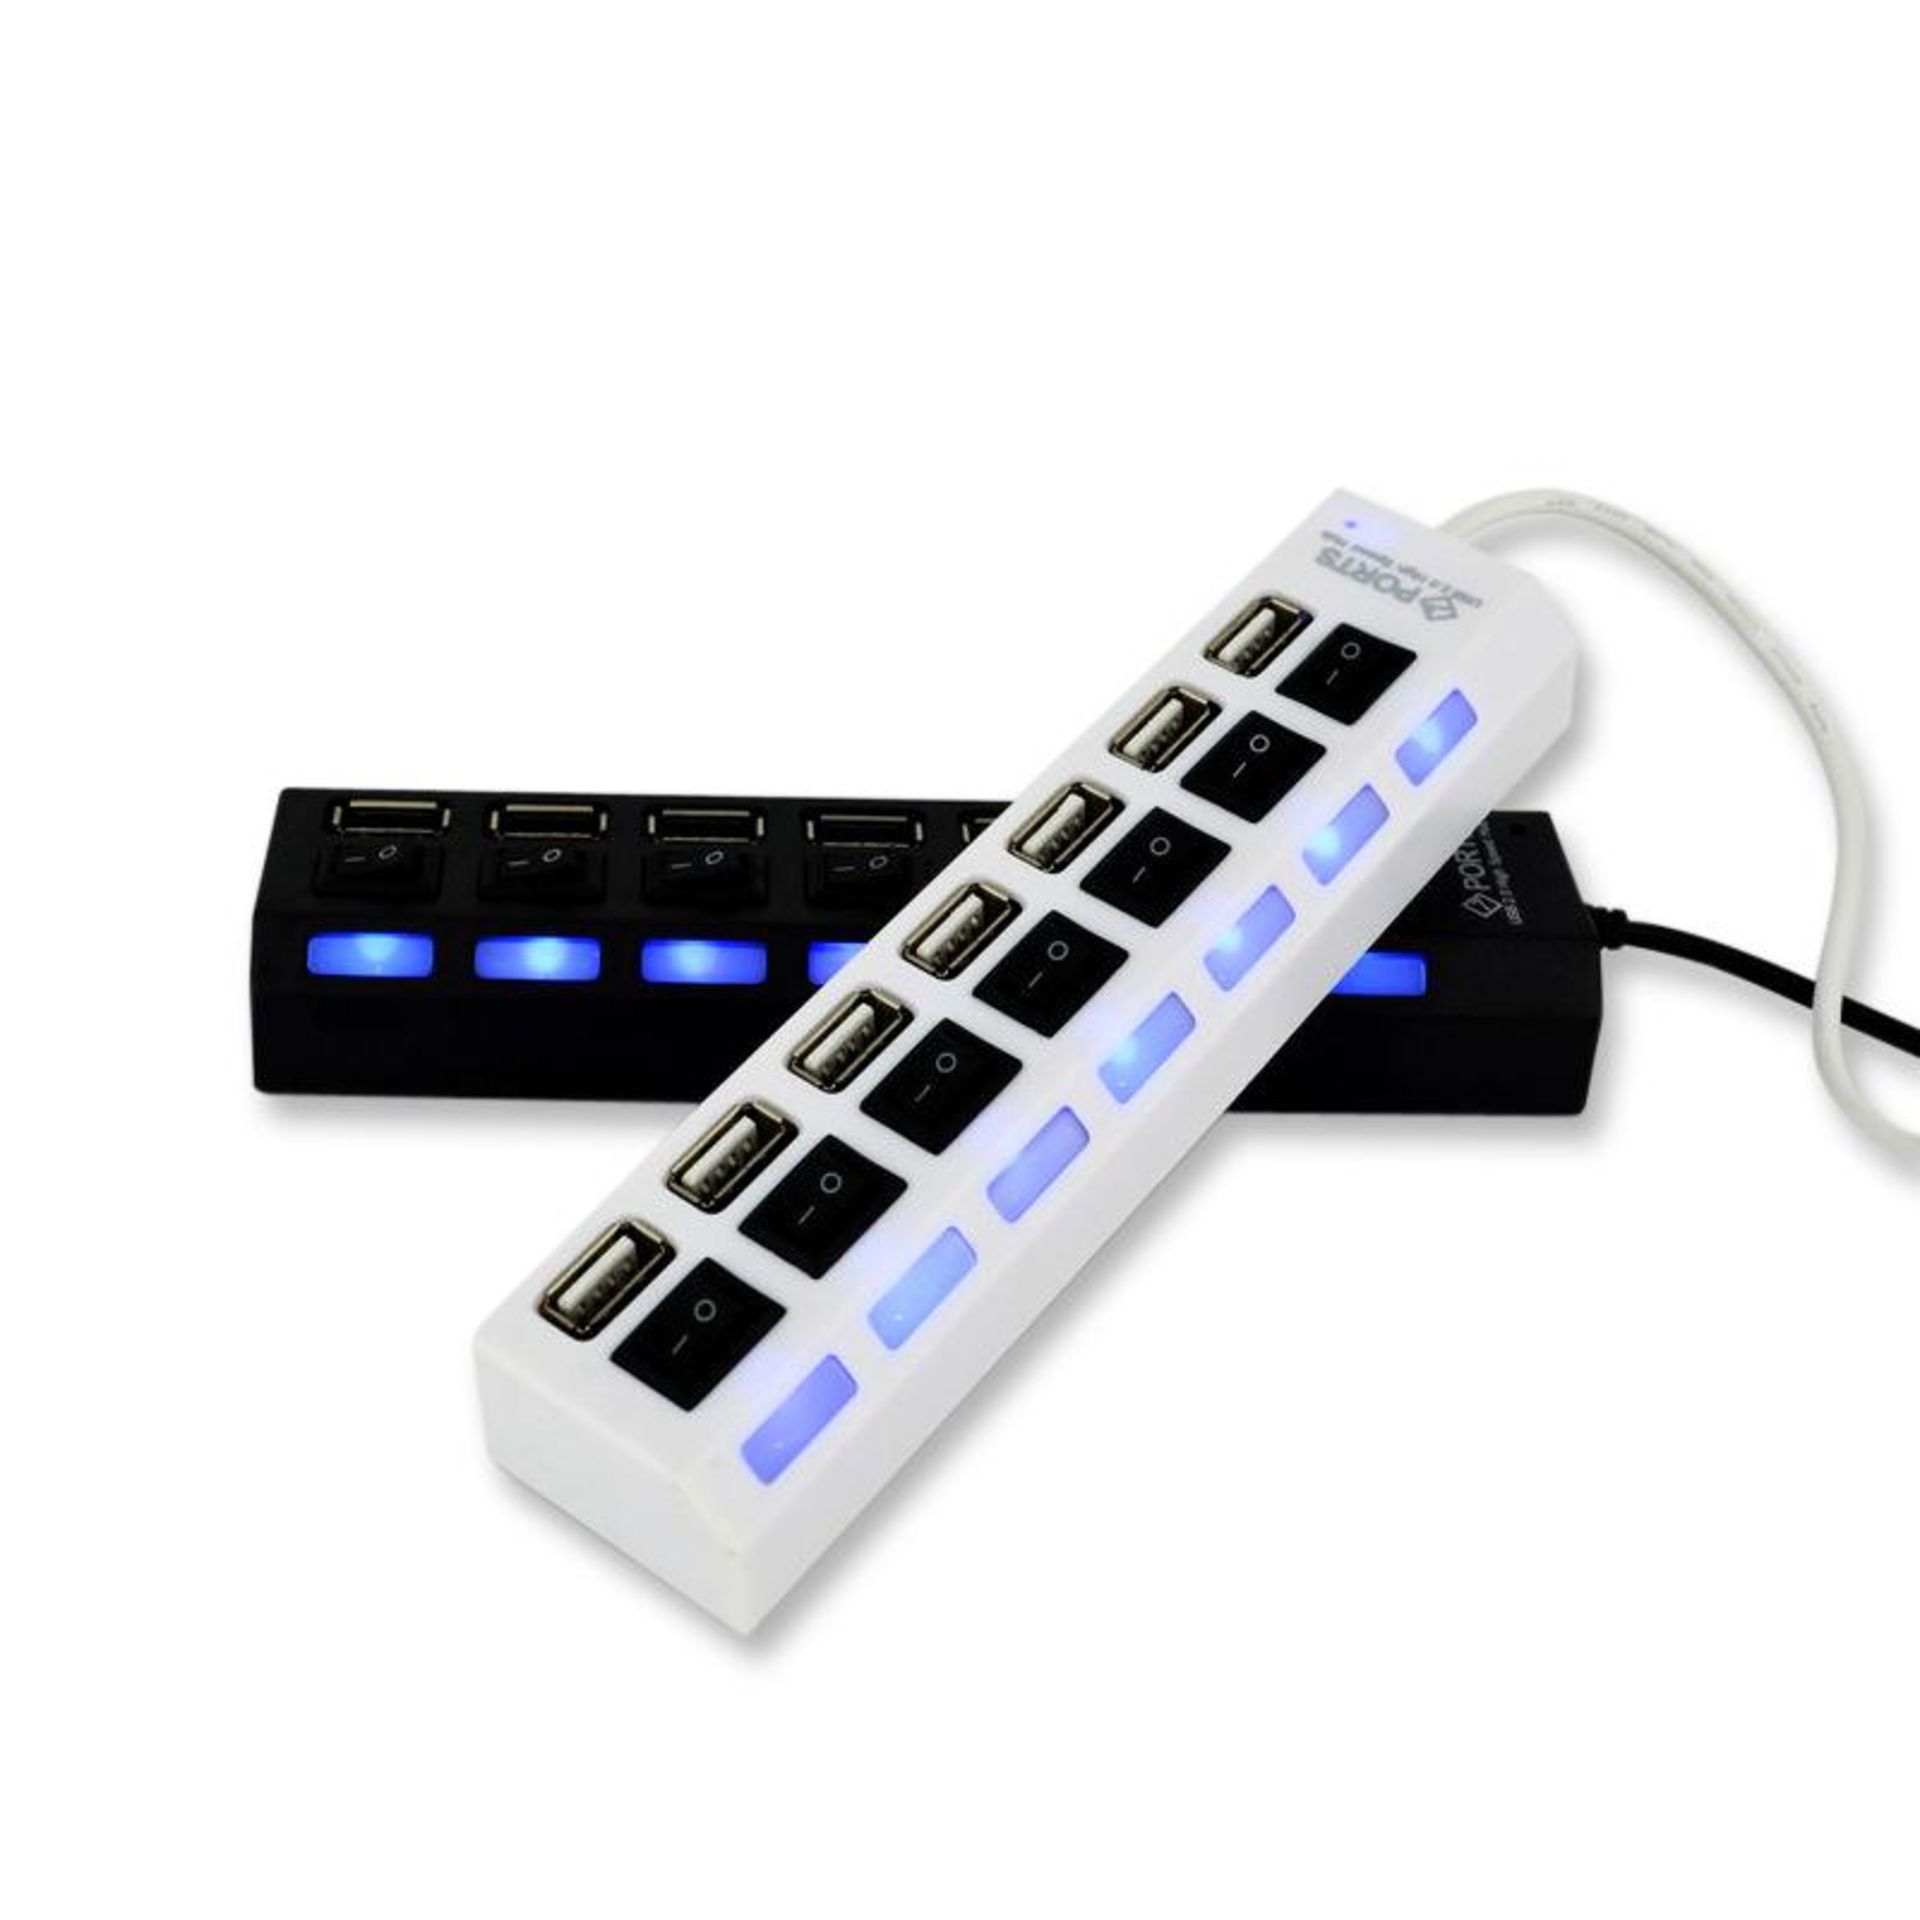 *TRADE QTY* Brand New 7 Port USB High Speed Hub - On/Off Switch on Each Port - With Blue LED - Image 2 of 3